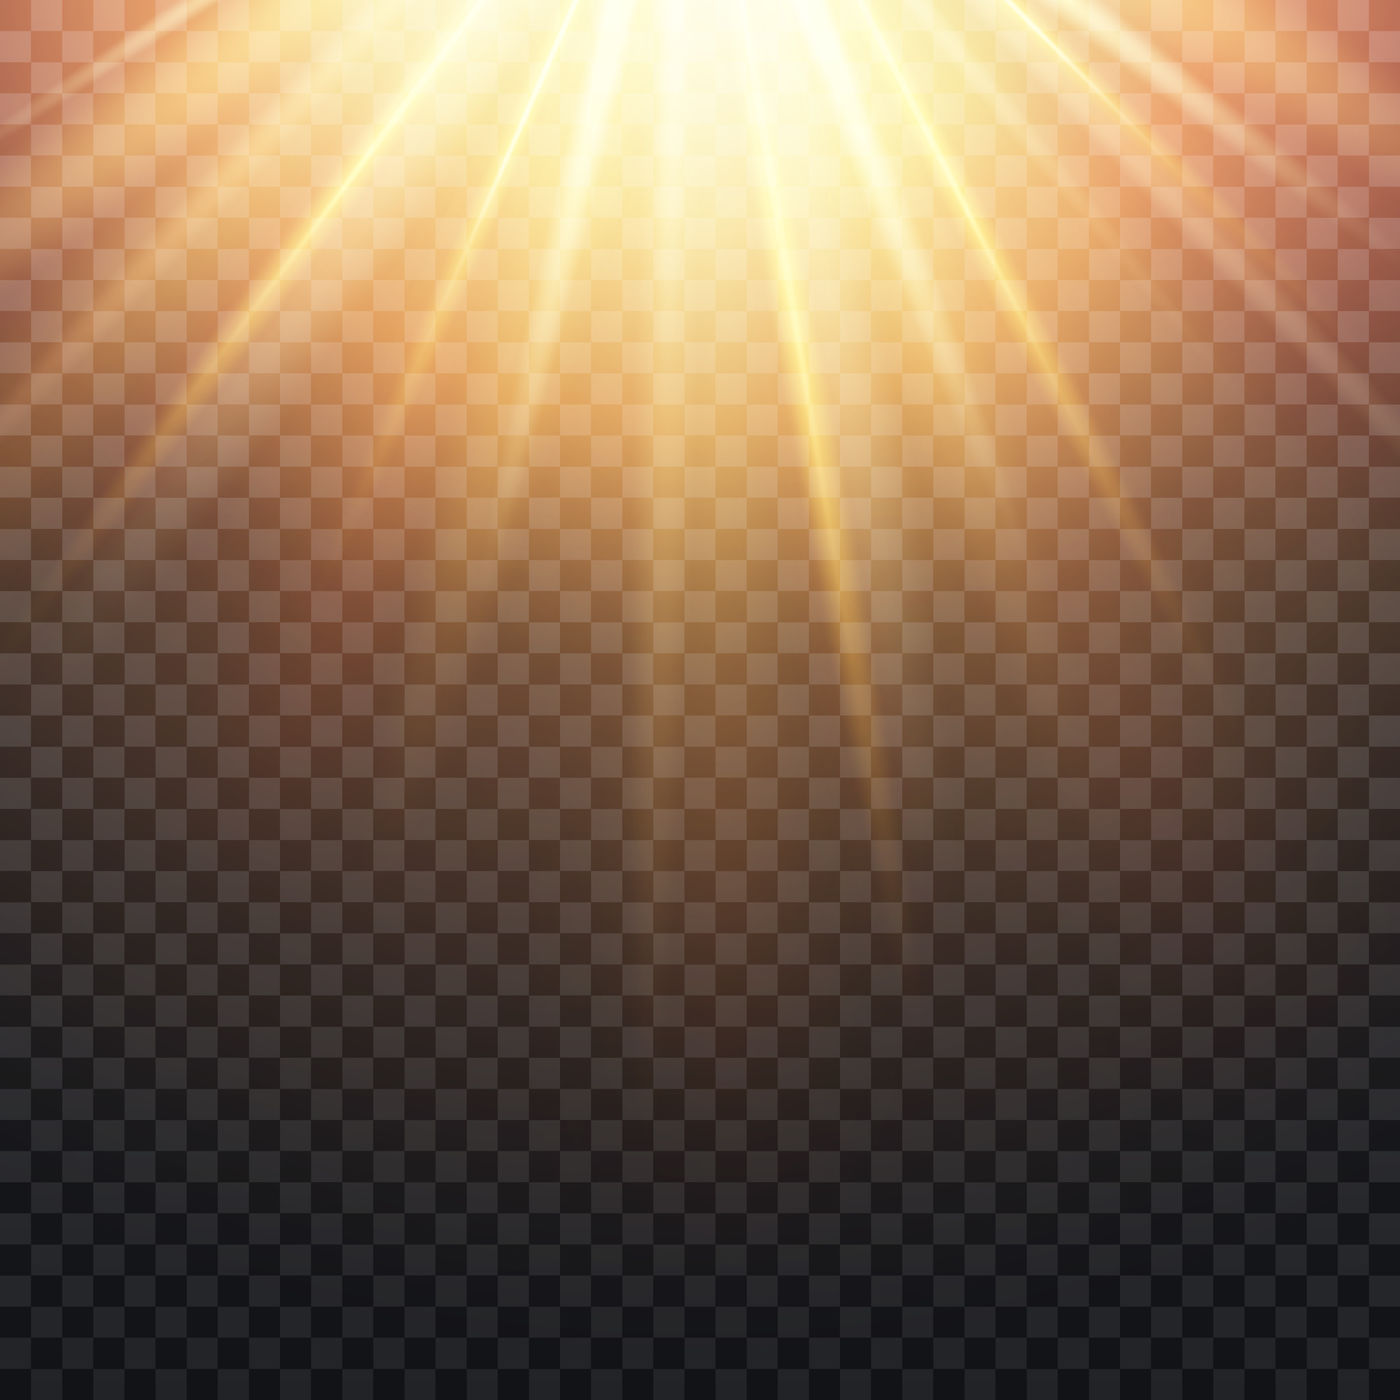 Realistic Transparent Yellow Sun Rays Warm Orange Flare Effect Isolat By Microvector Thehungryjpeg Com